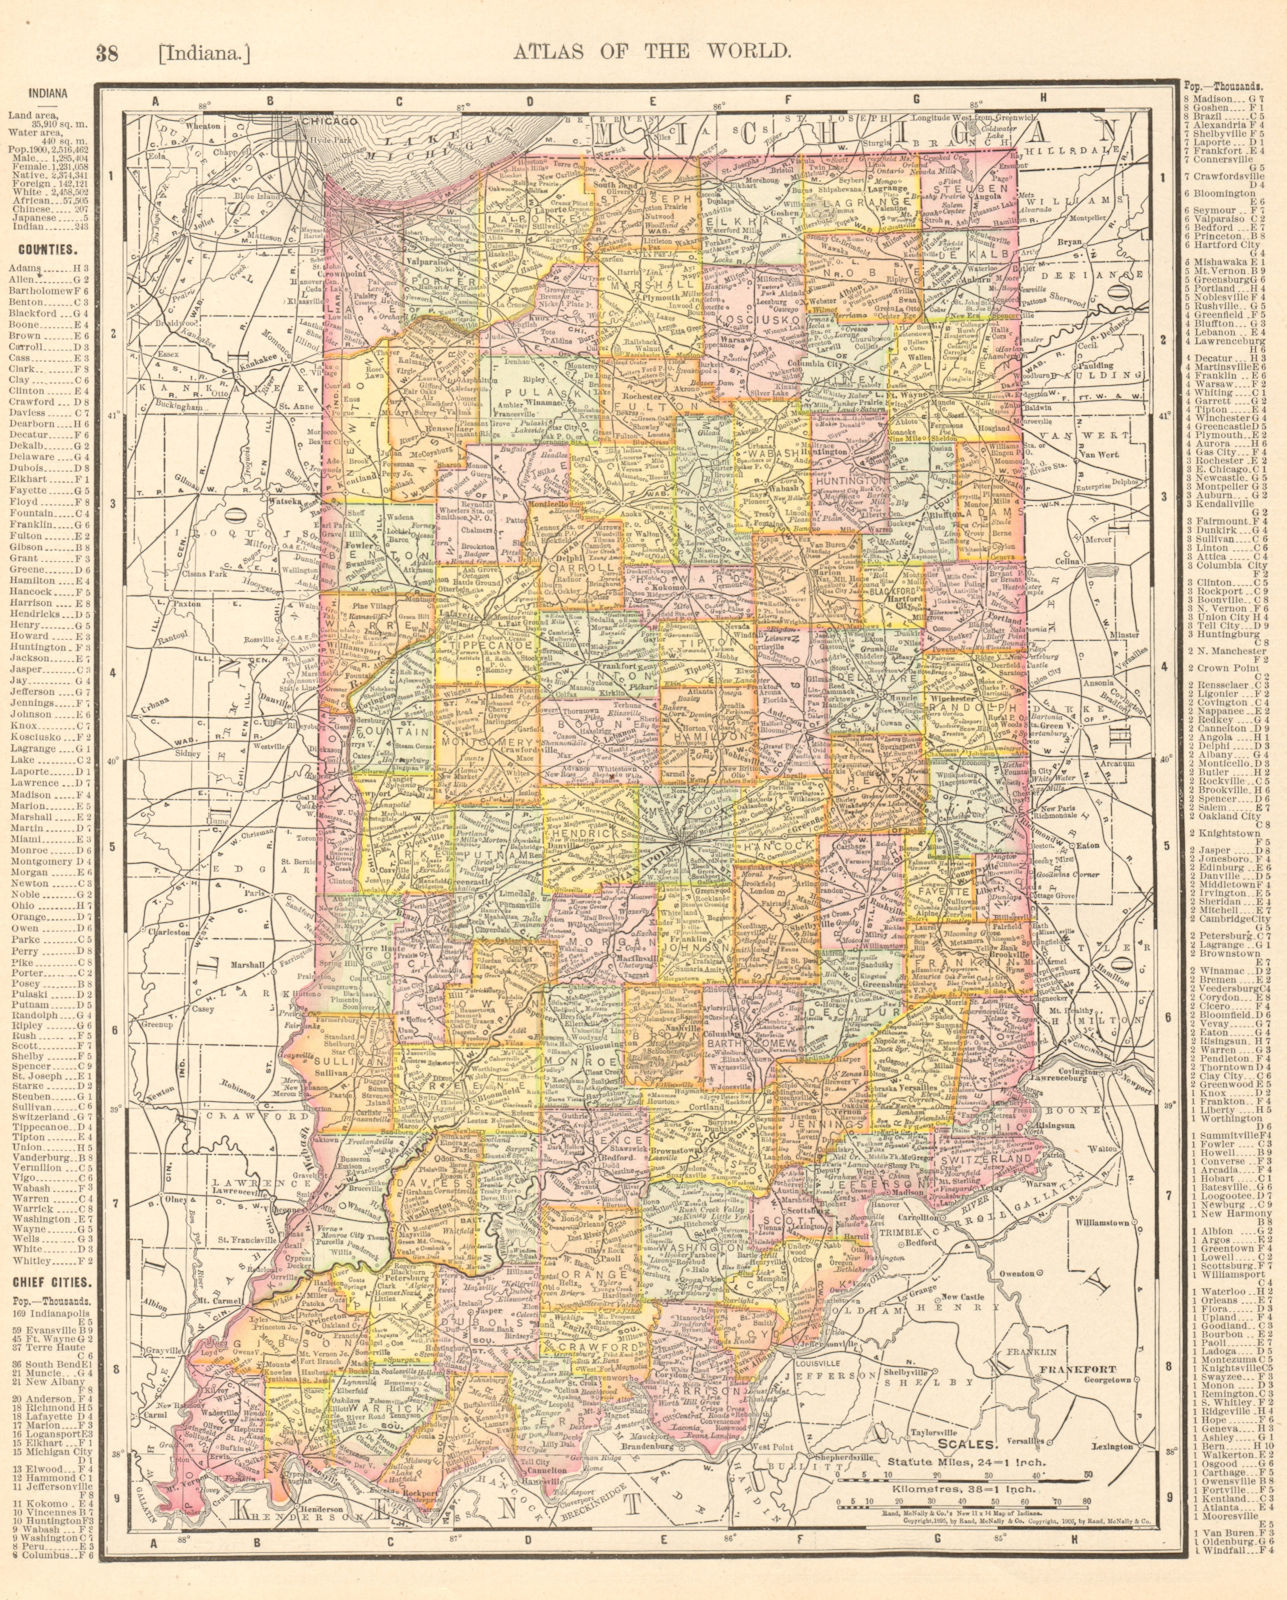 Associate Product Indiana state map showing counties. RAND MCNALLY 1906 old antique chart